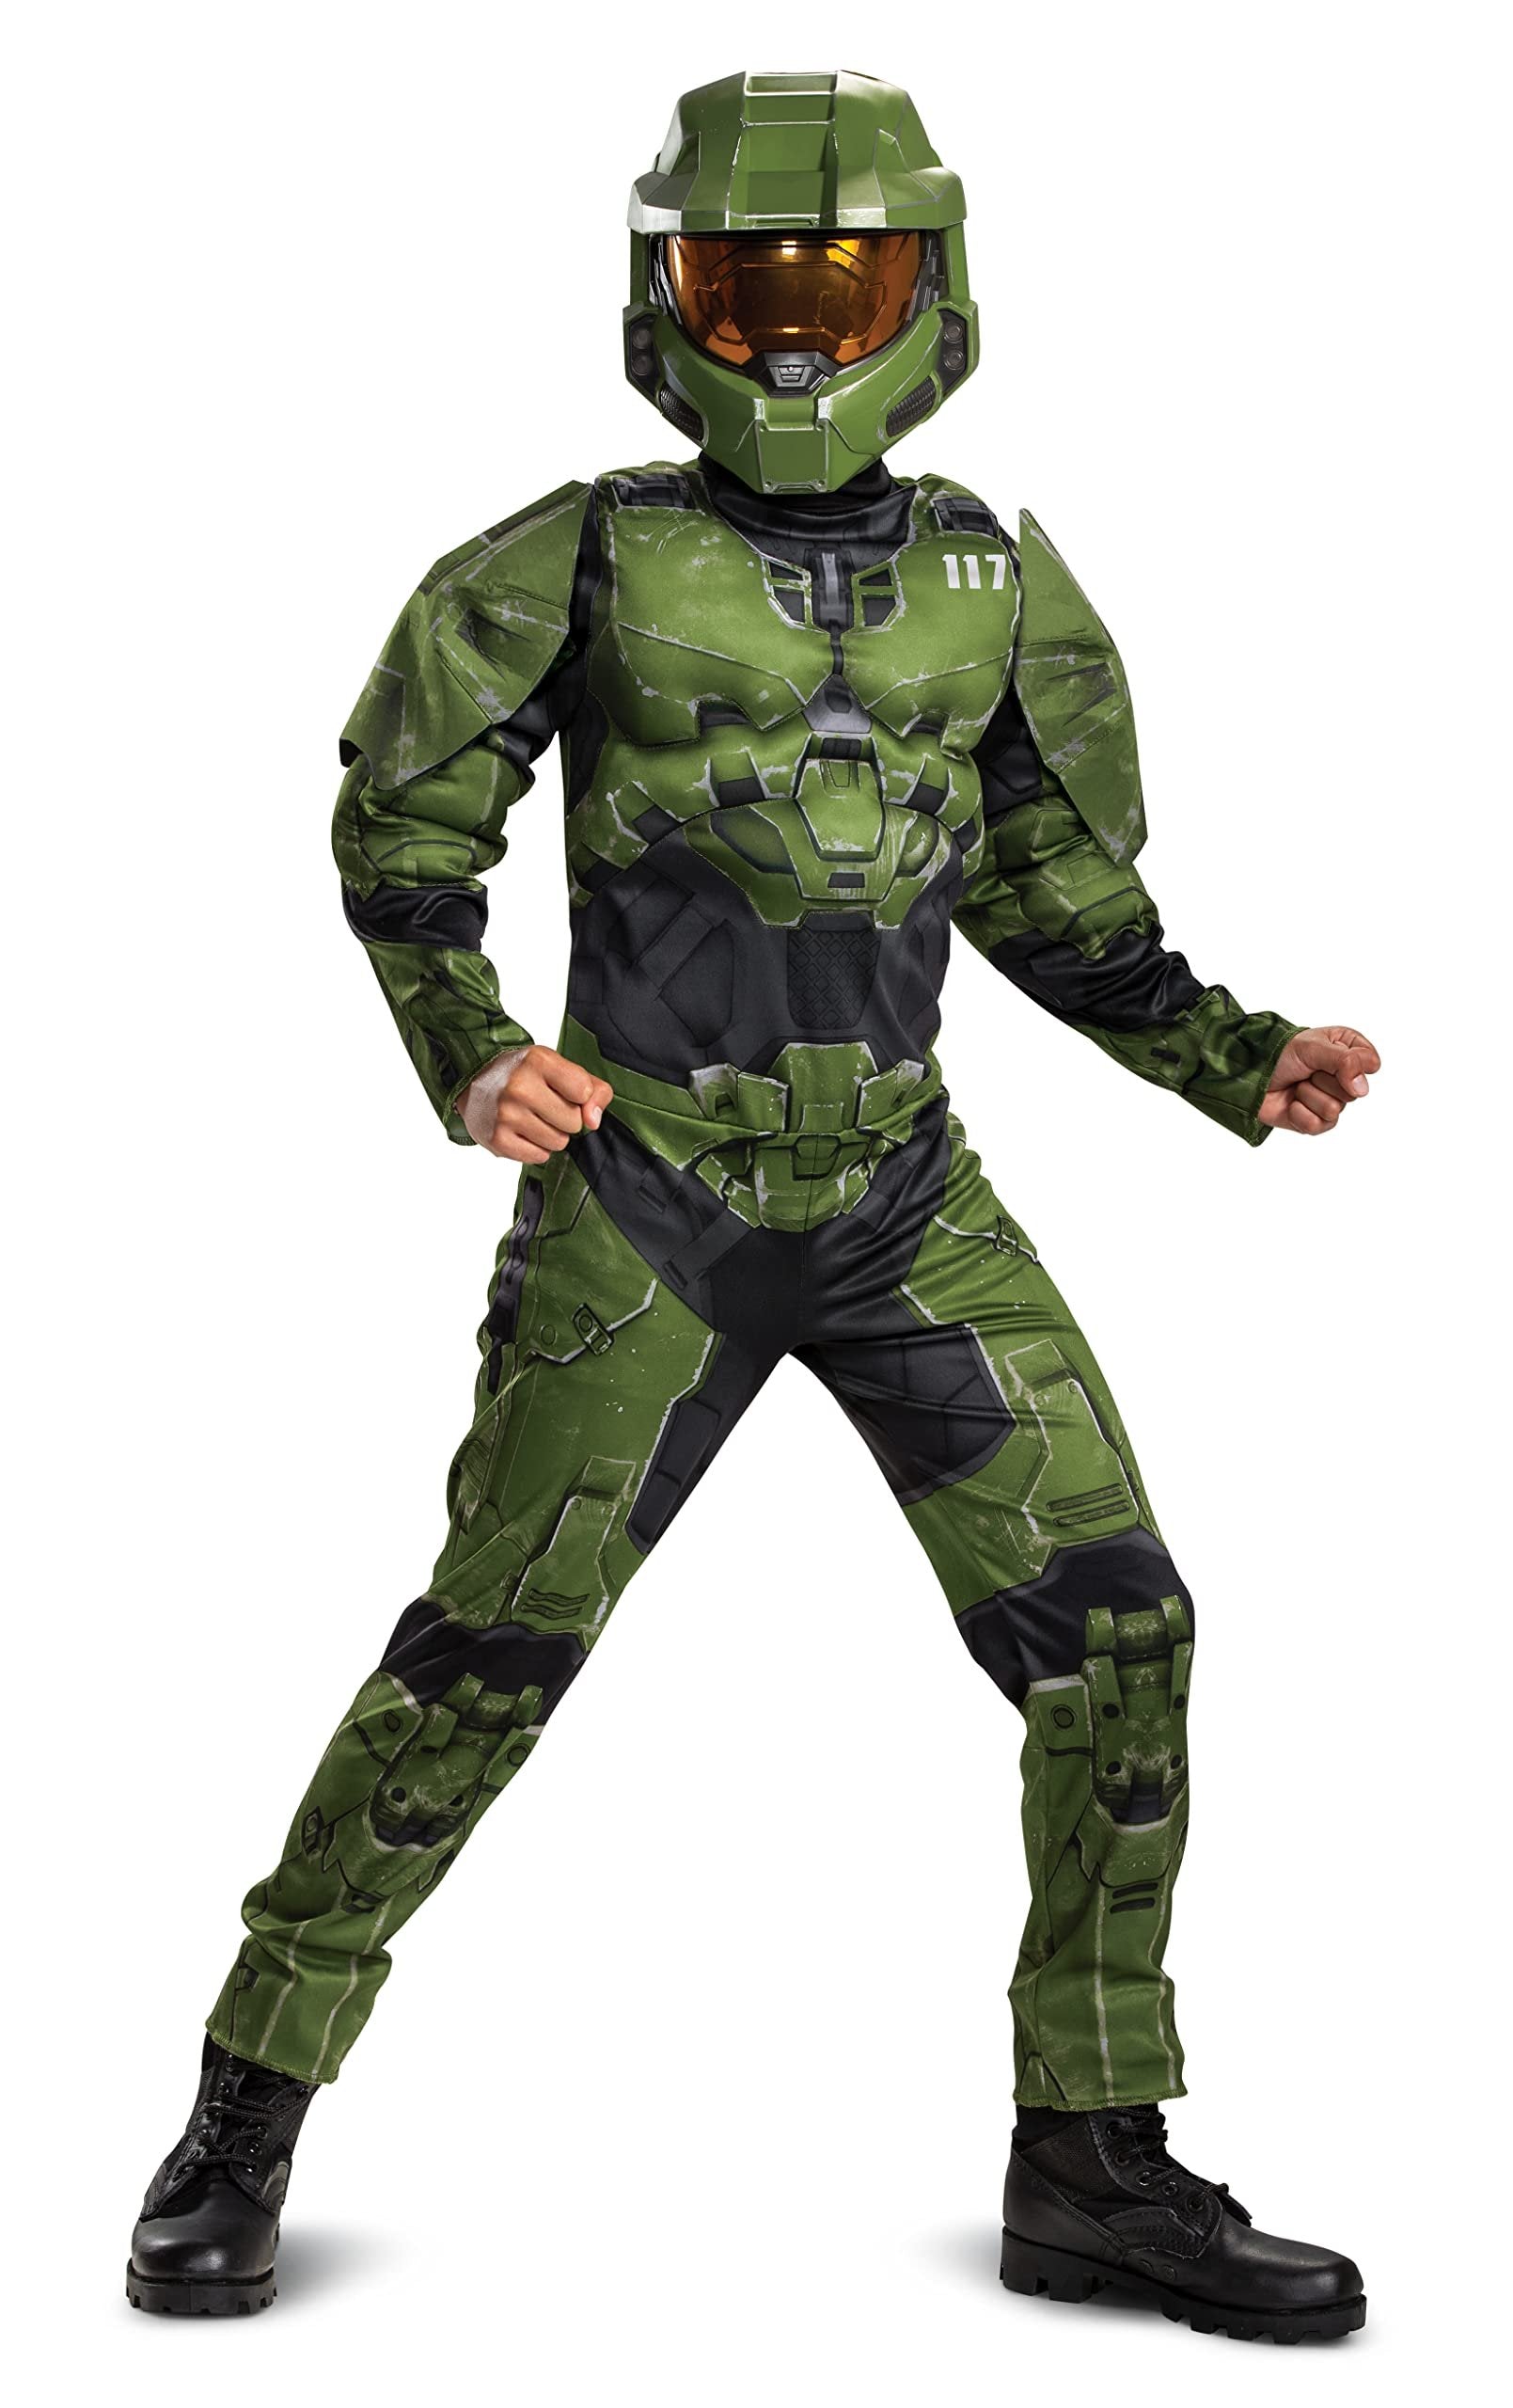 Disguise Halo Infinite Master Chief Costume, Kids Size Muscle Padded Video Game Inspired Character Jumpsuit, Child Size XL (14-16), Green & Black